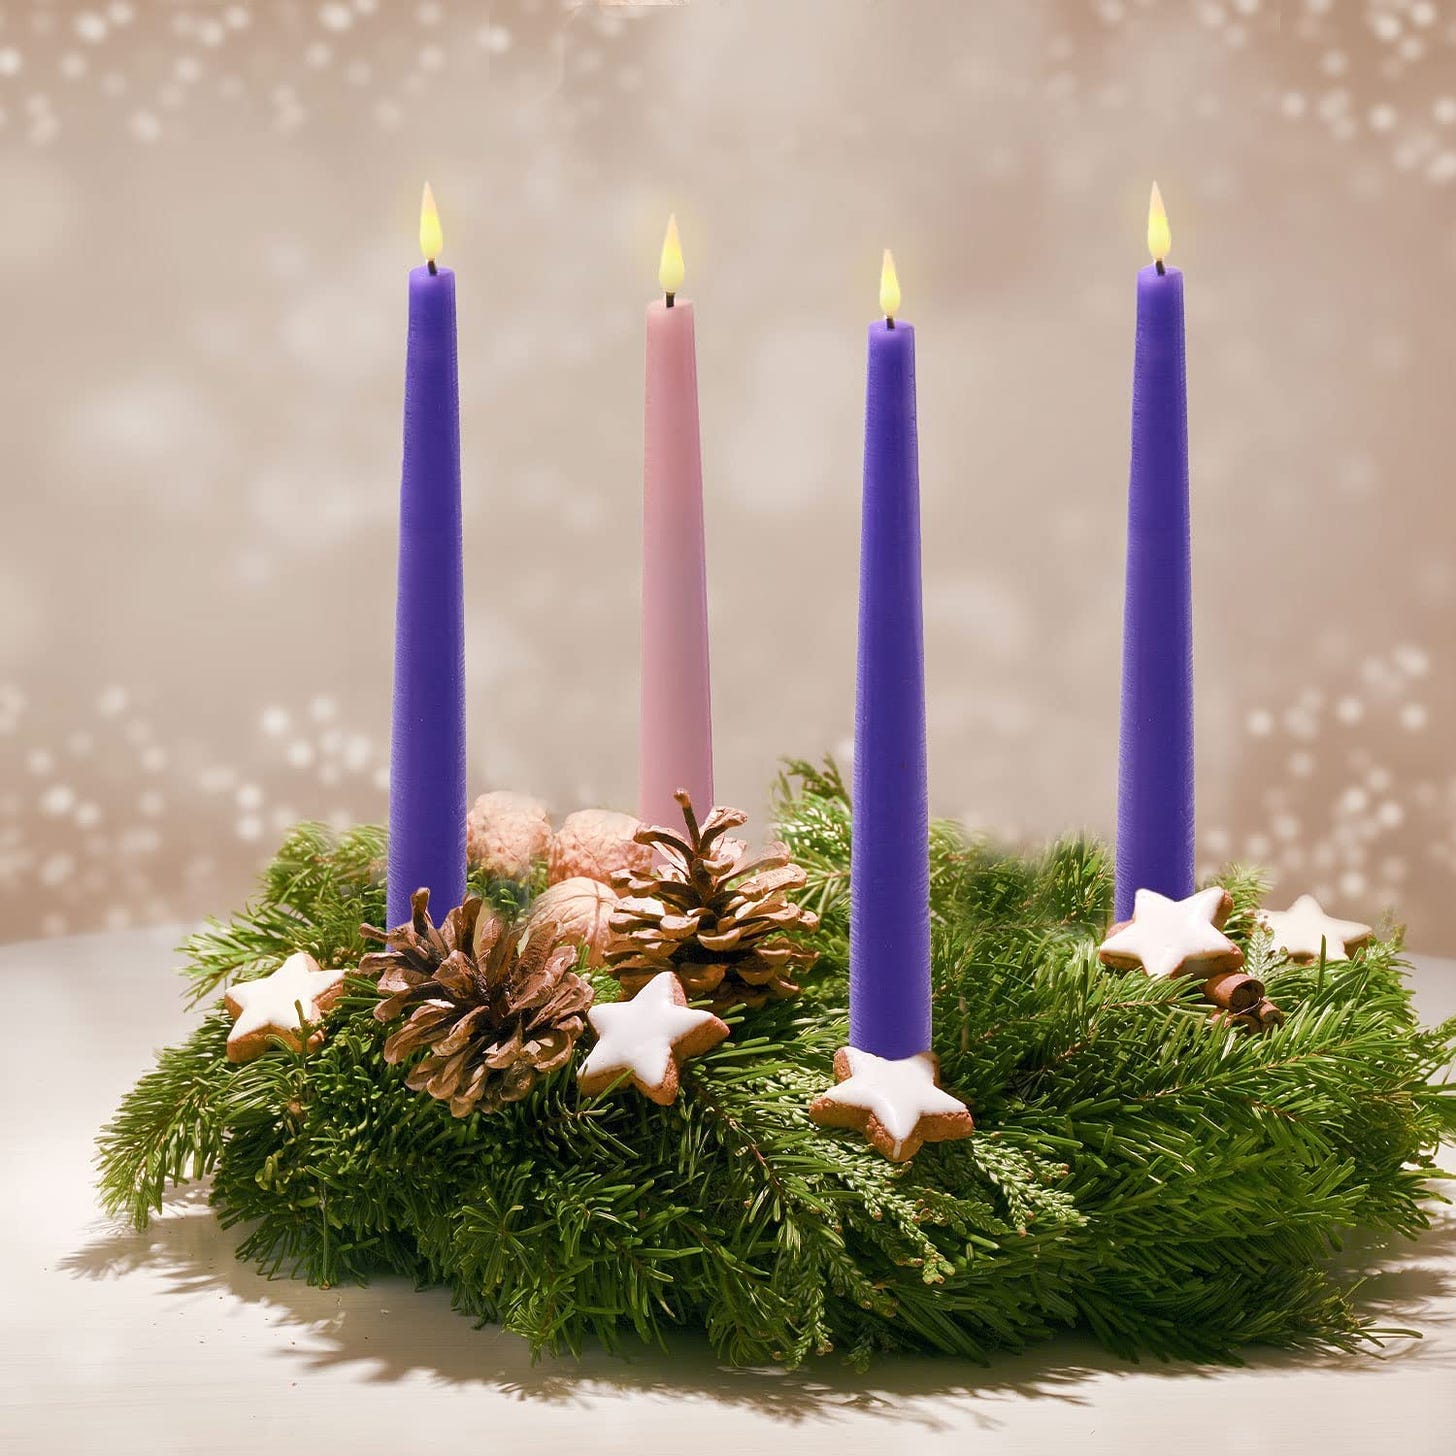 Amazon.com: Advent Flameless Candles, Set of 4 - Real Wax, 9 Inch Tall,  Realistic 3D Flames, Remote & Batteries Included, Pink and Purple LED Taper  Candles for Catholic Wreath/Christmas Decoration : Tools